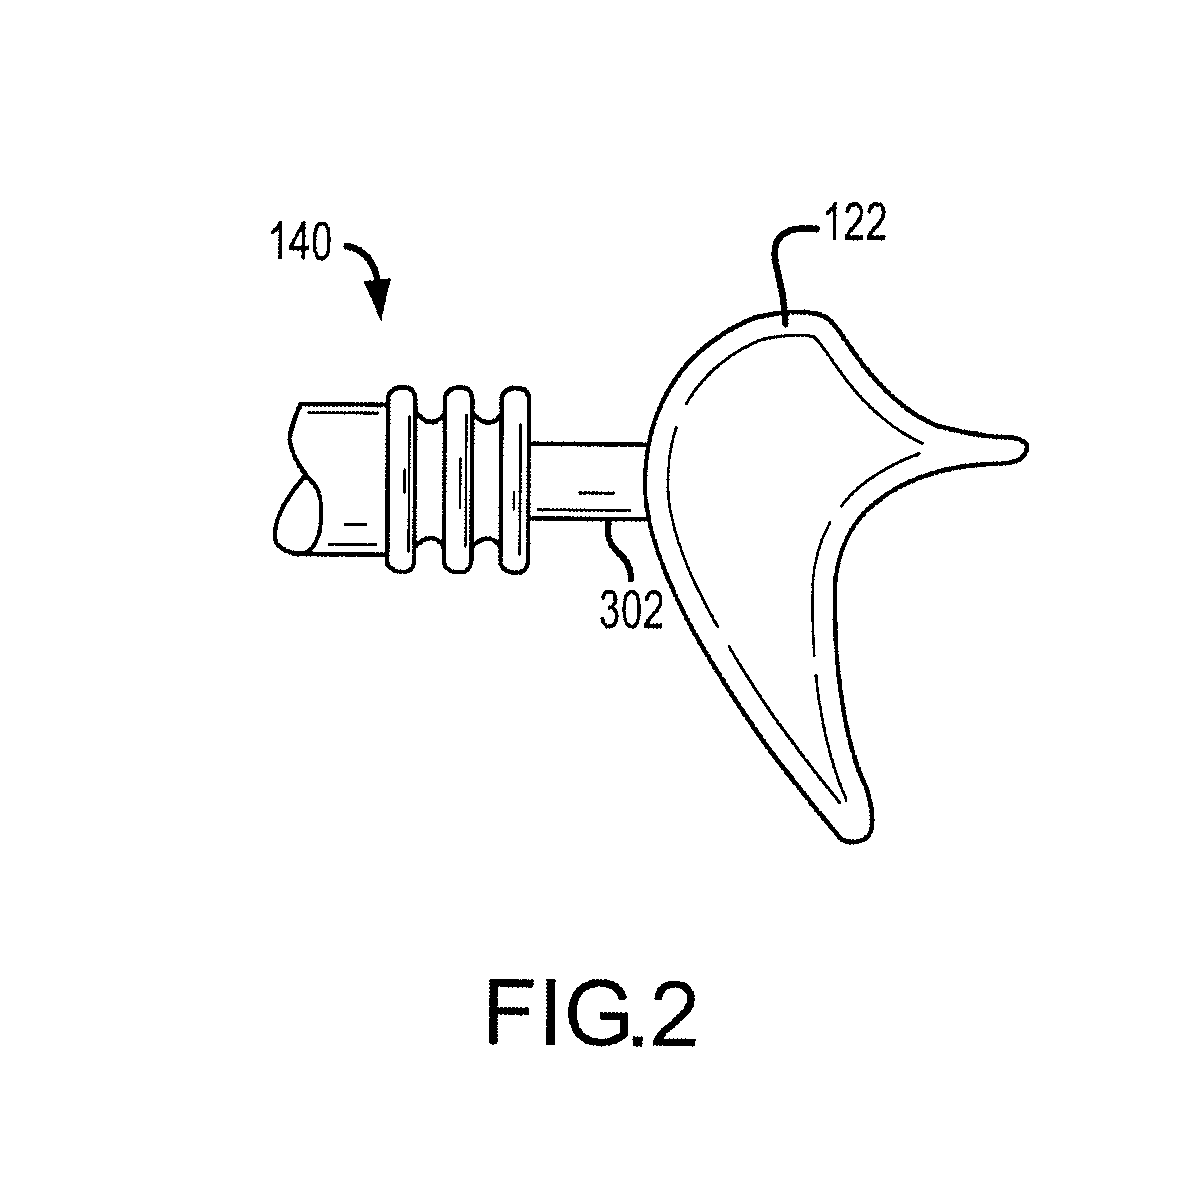 Compressive coupling of an implantable hearing aid actuator to an auditory component